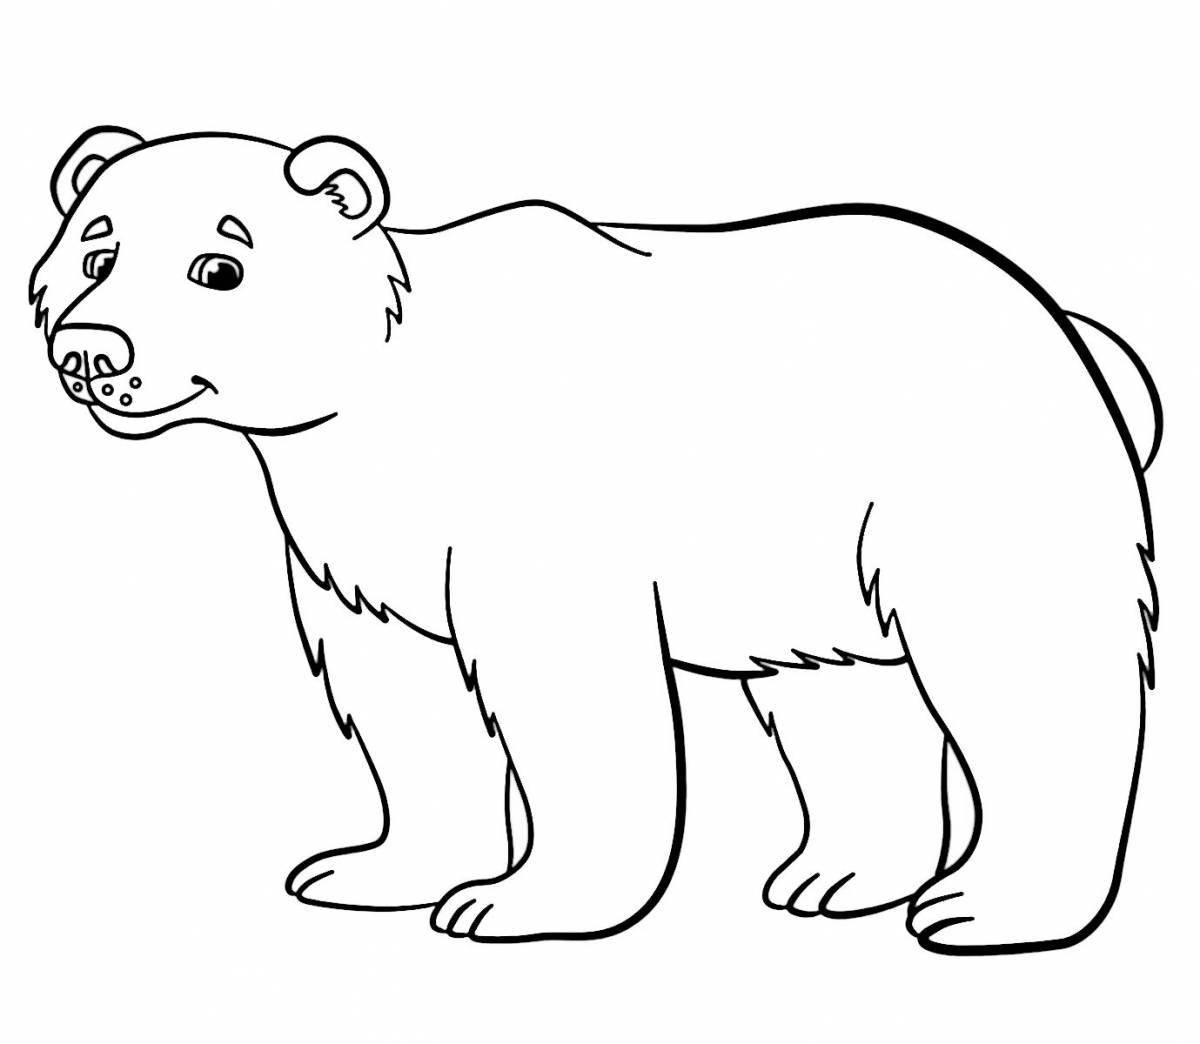 Charming white and brown bear coloring book